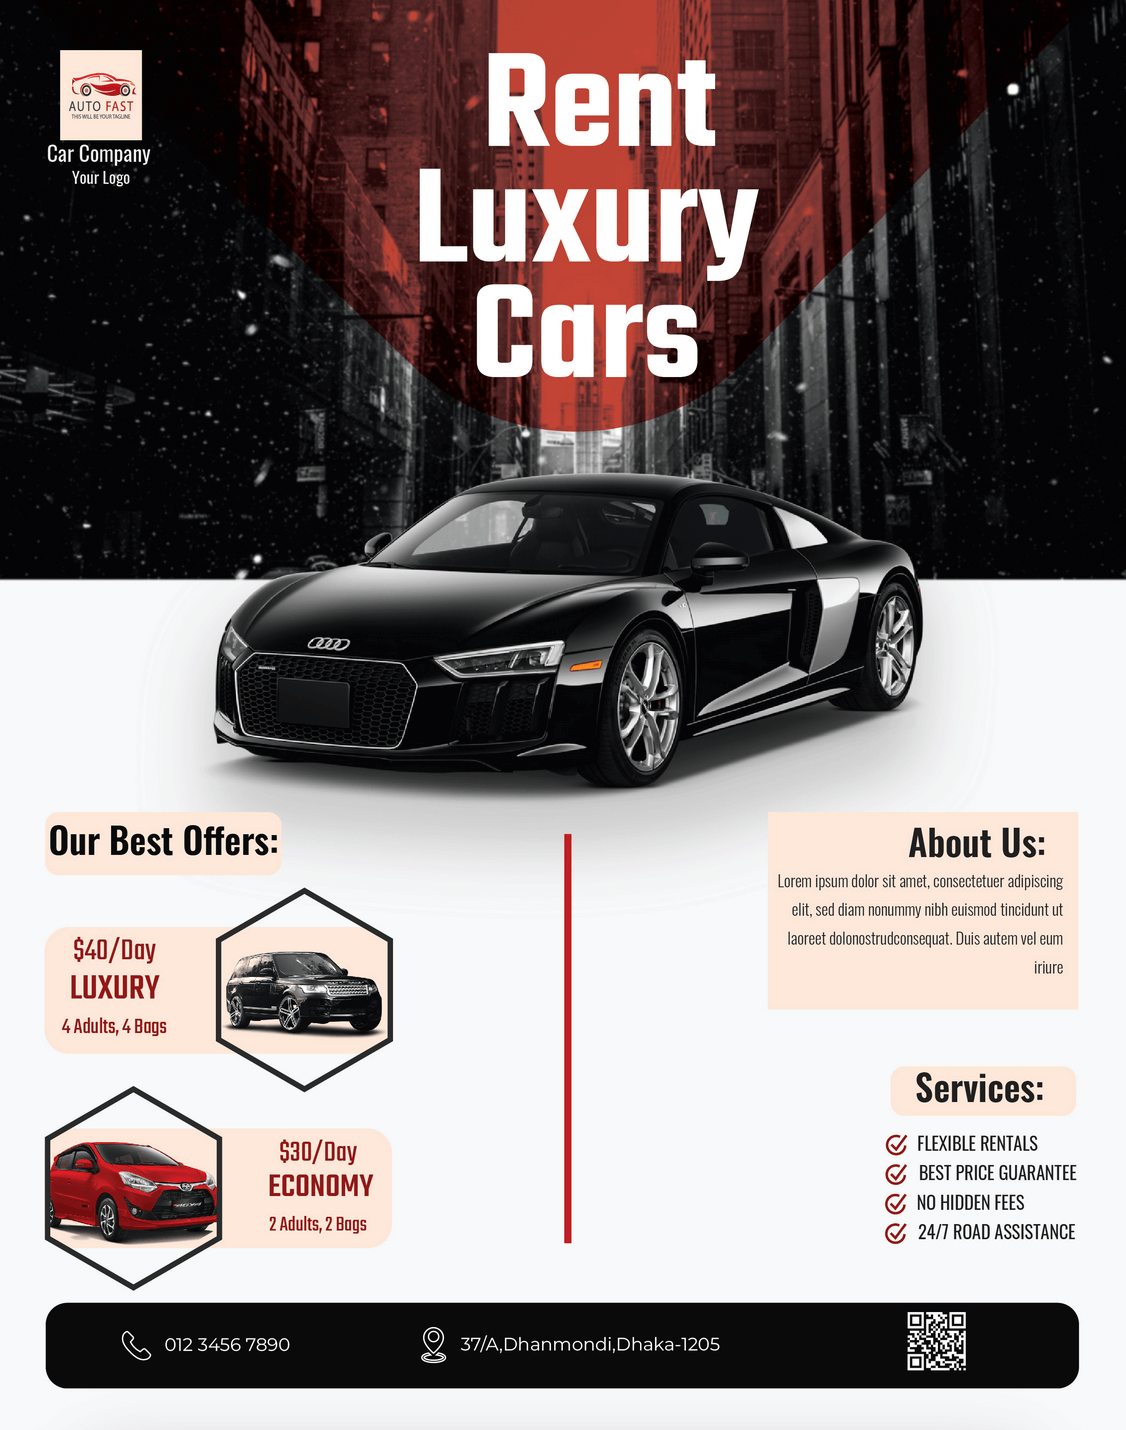 A flyer template for a car rental company